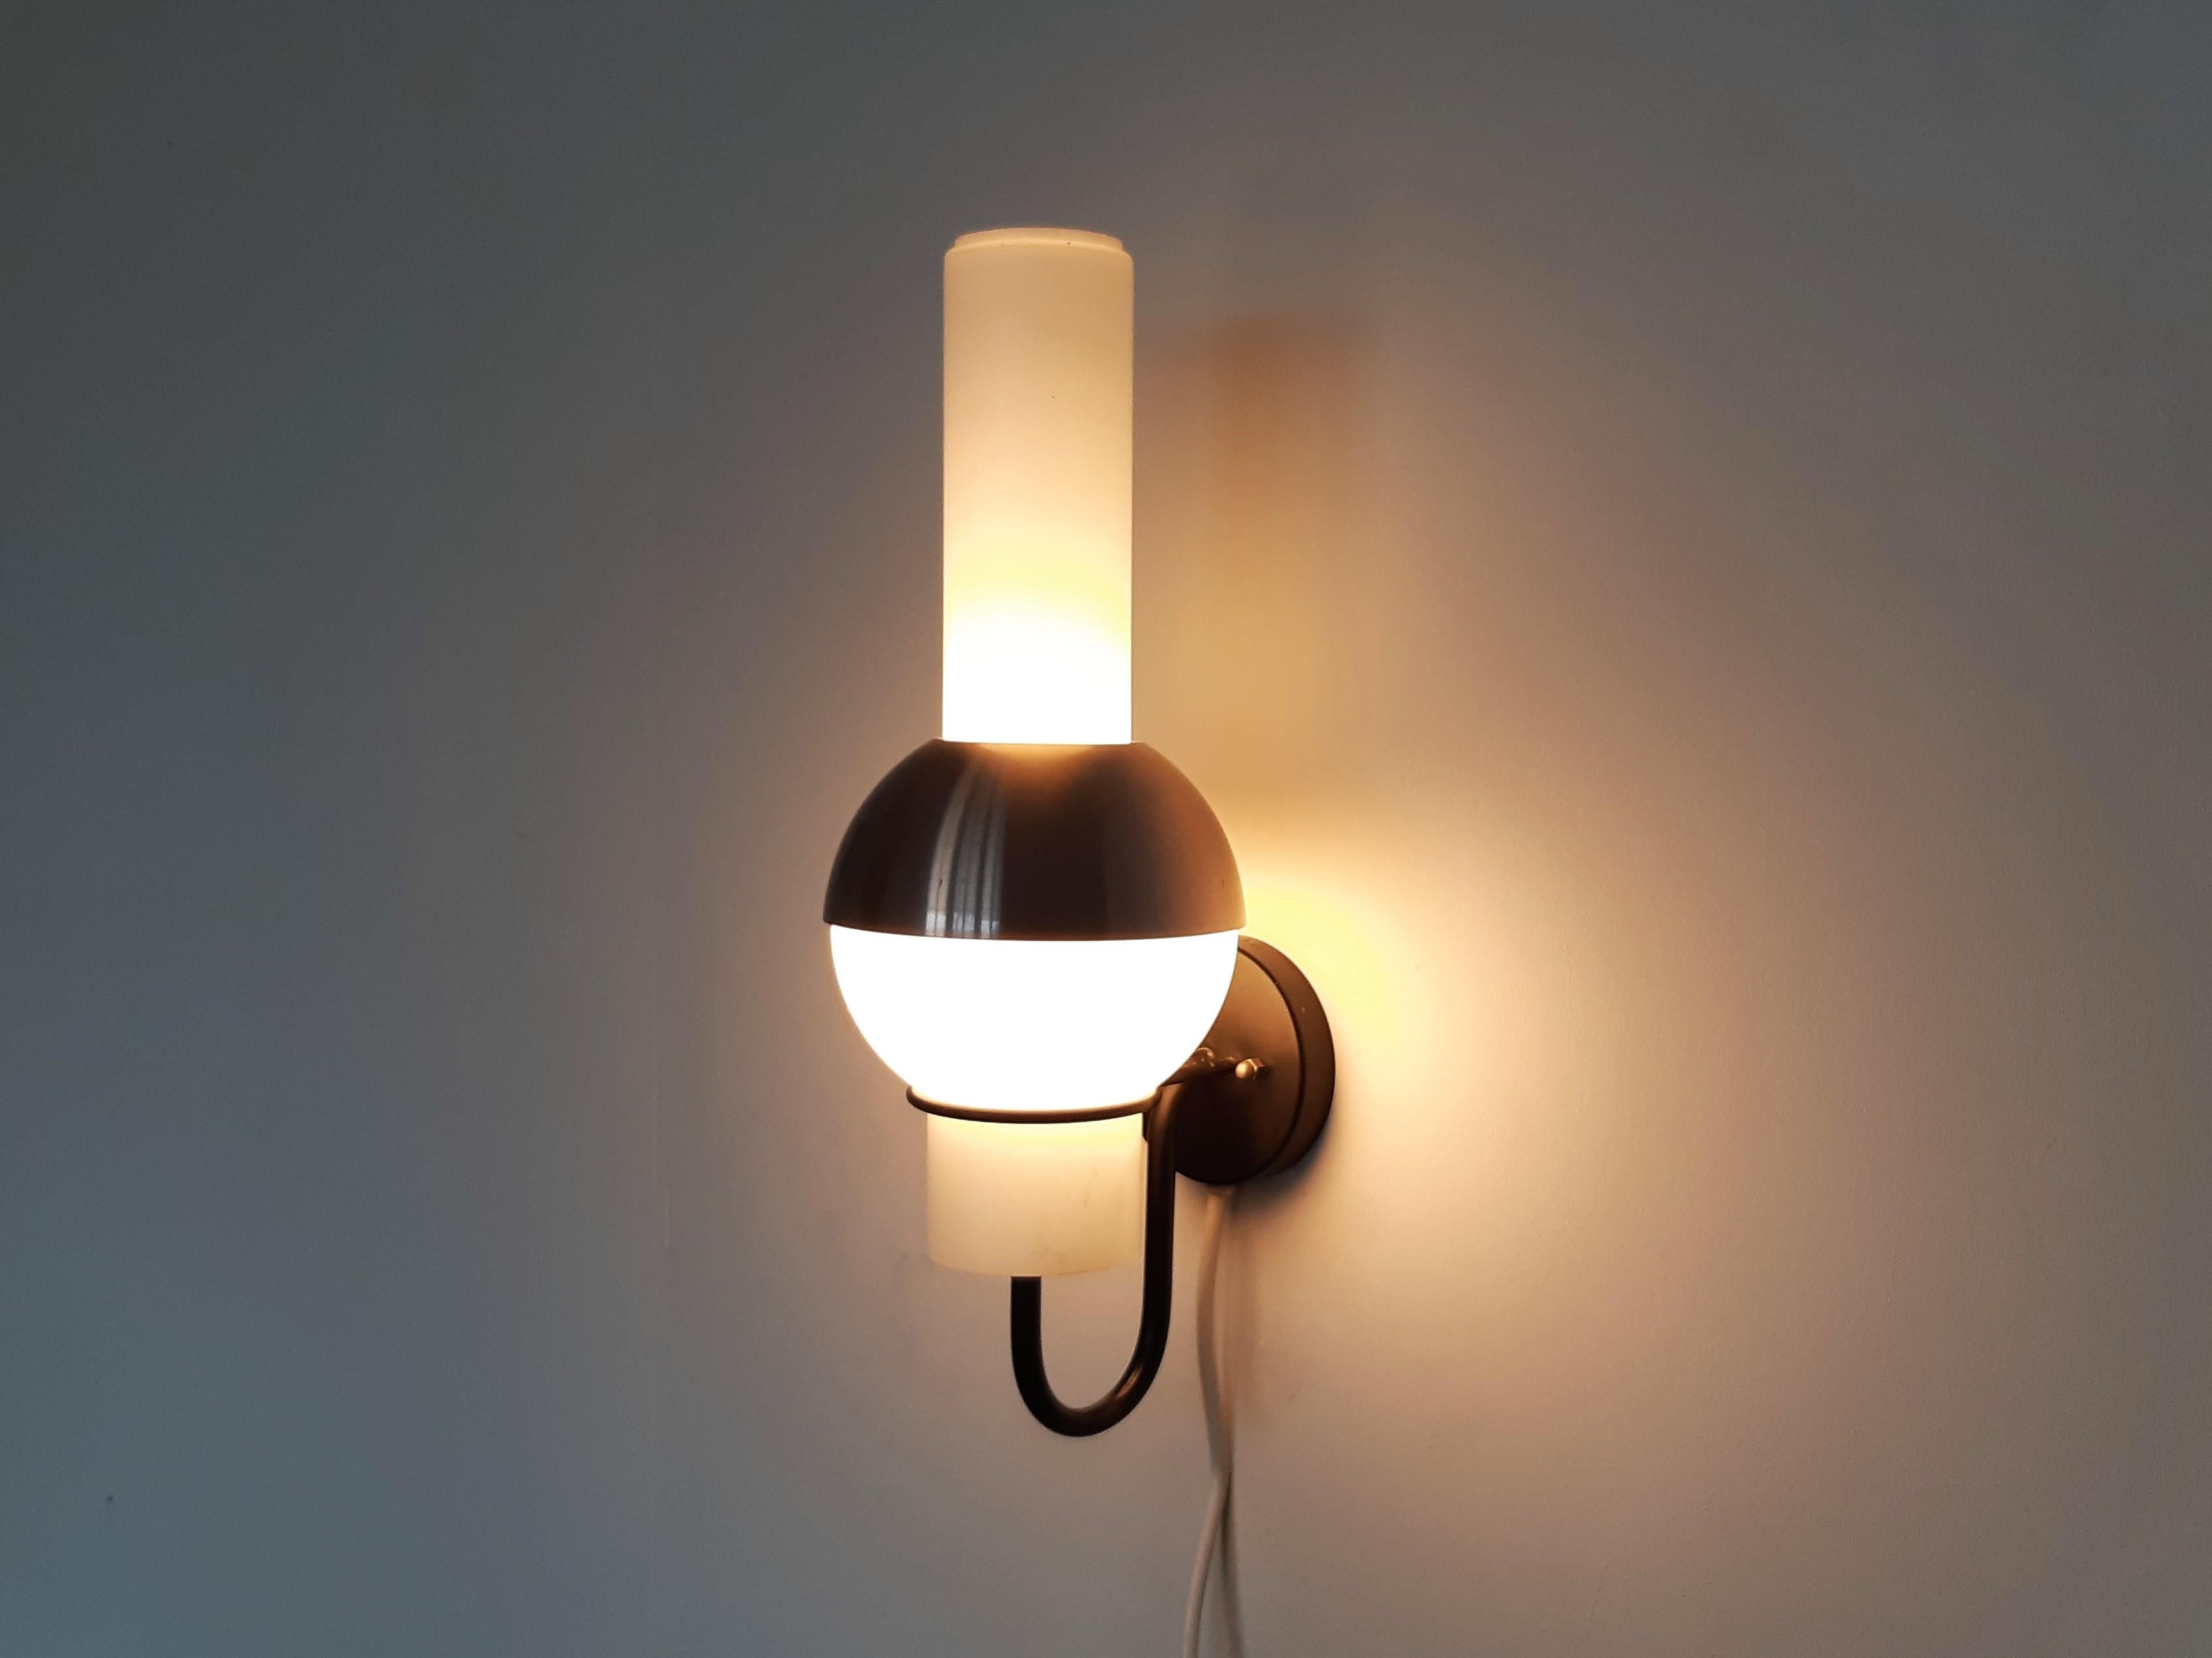 This wall lamp, model 'Lucifero' or 'Quinquet', was designed for RAAK in the 1960's. It has a black coated metal fixture with a ring that holds the opaline glass shade/diffuser. Decorated by a copper colored aluminum cap that can be removed. A